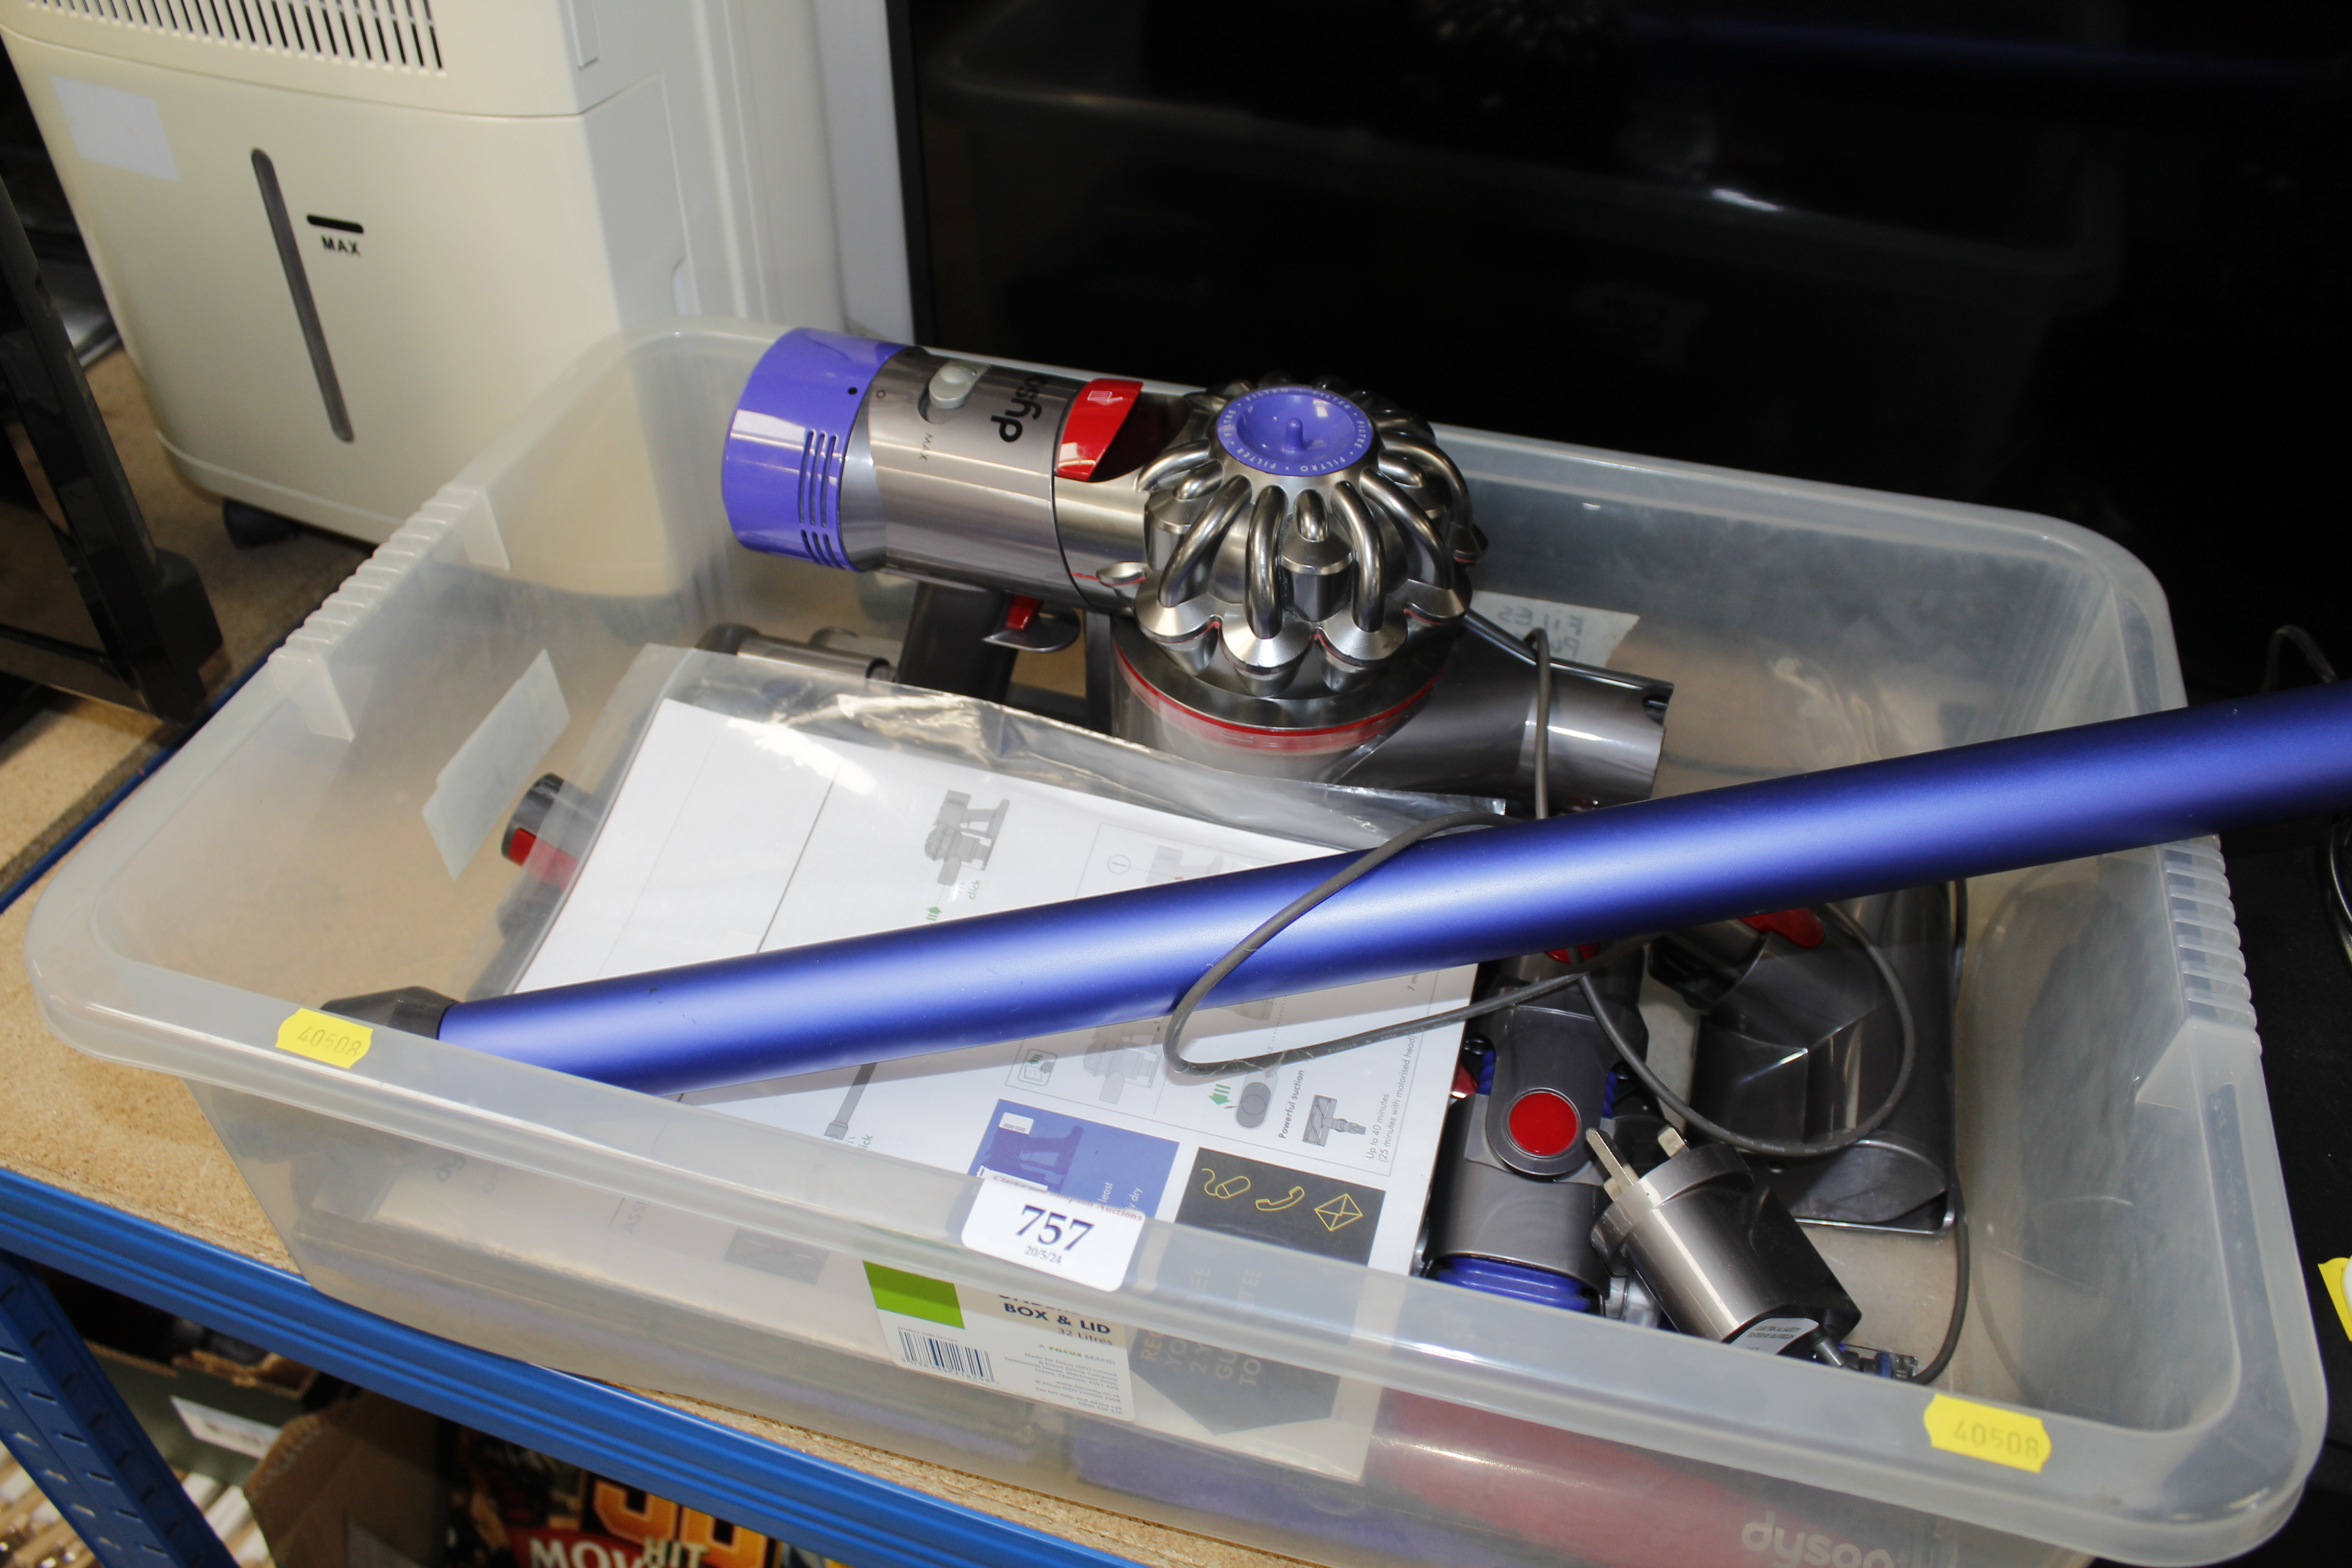 A Dyson V8 vacuum cleaner with various accessories